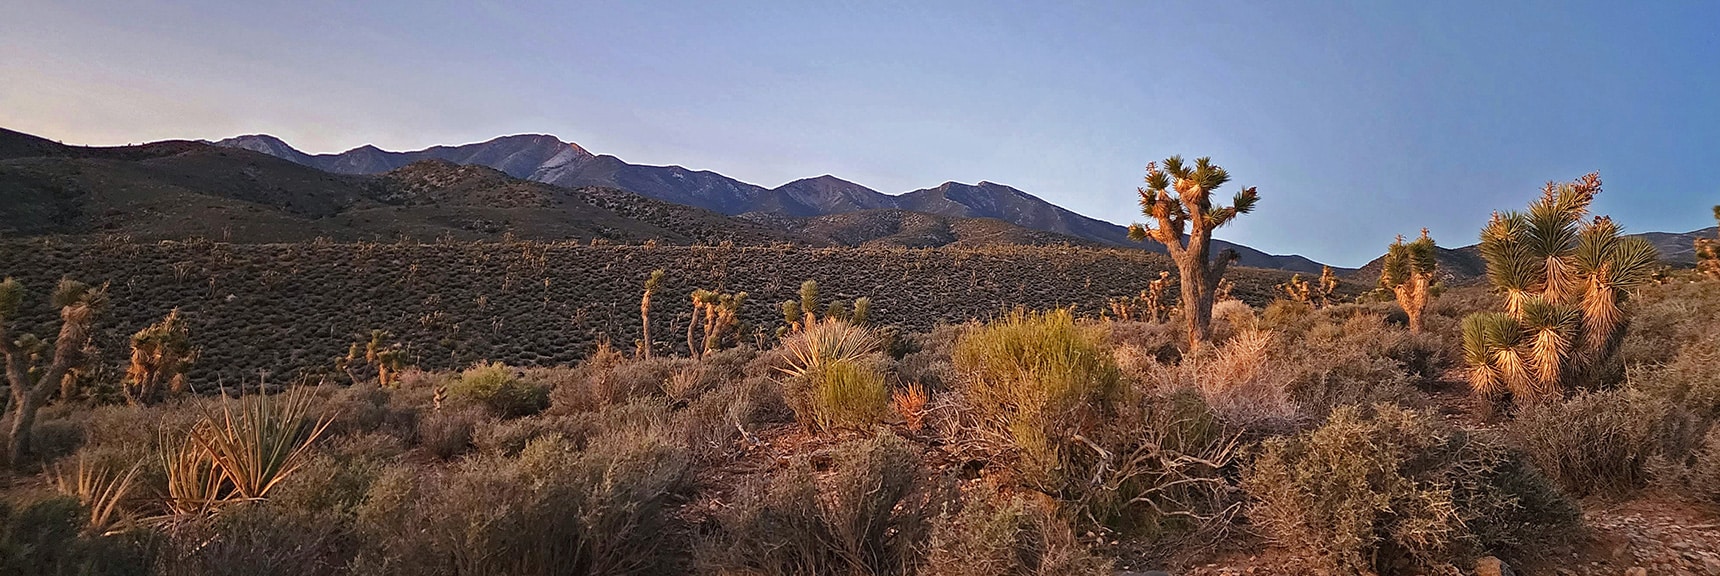 First View of La Madre Mountains. About 4,700ft in Joshua Tree Band | Kyle Canyon Grand Crossing | Northern Half | La Madre Mountains Wilderness, Nevada